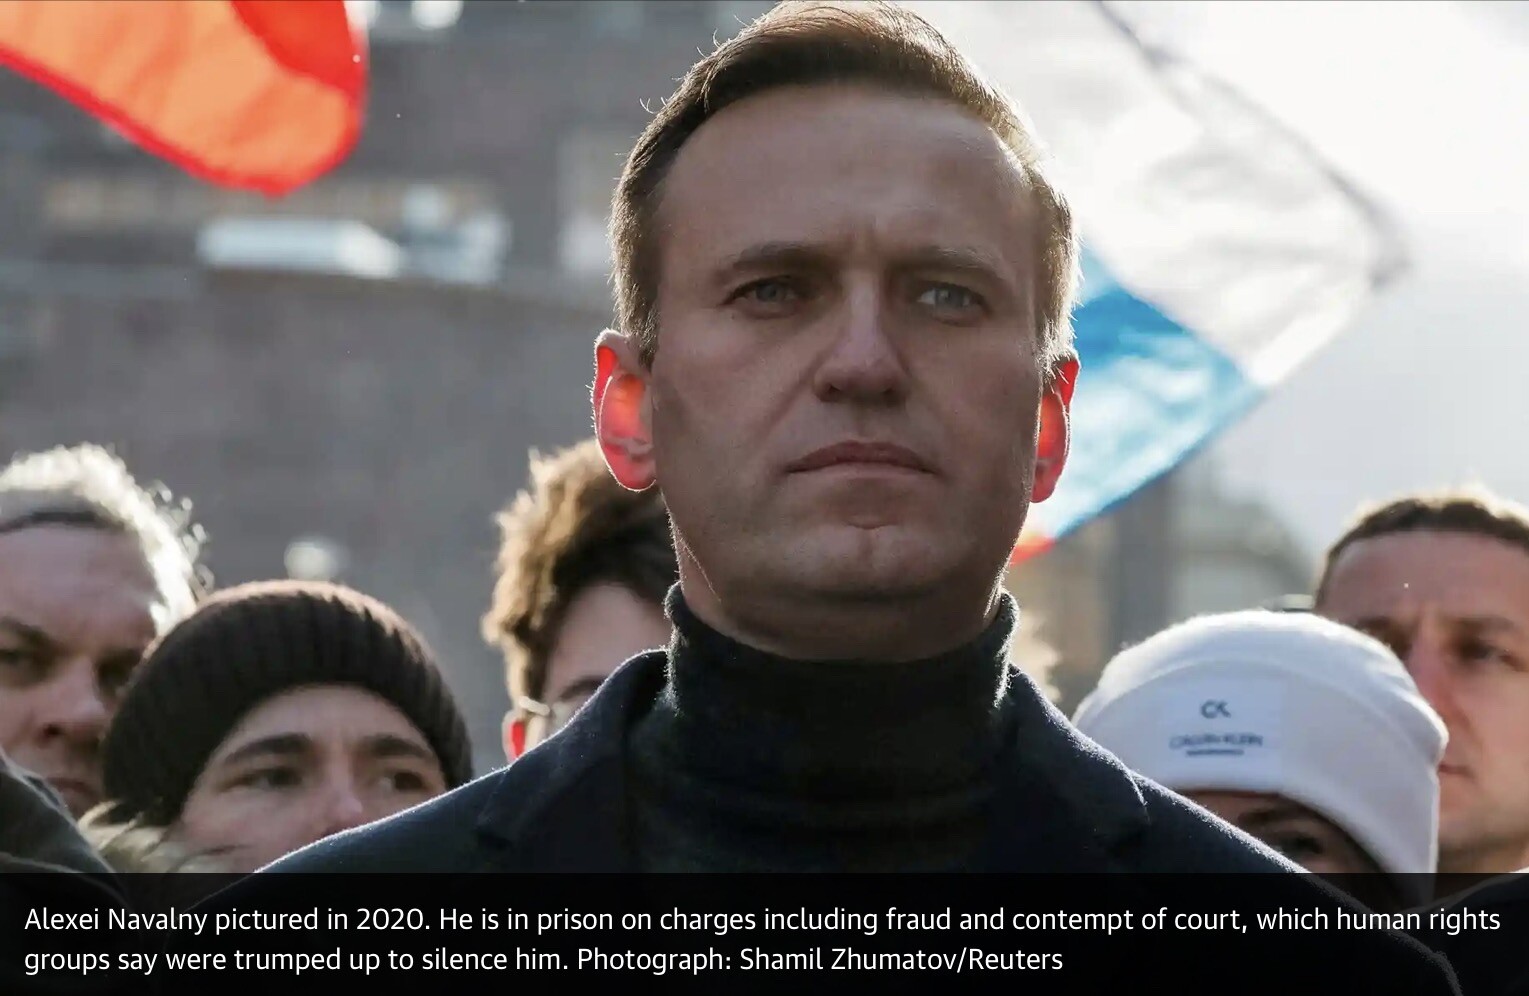 Navalny photo, 2020. He is in Russian prison on charges of fraud and contempt of court, which human rights groups say were trumped up to silence him.